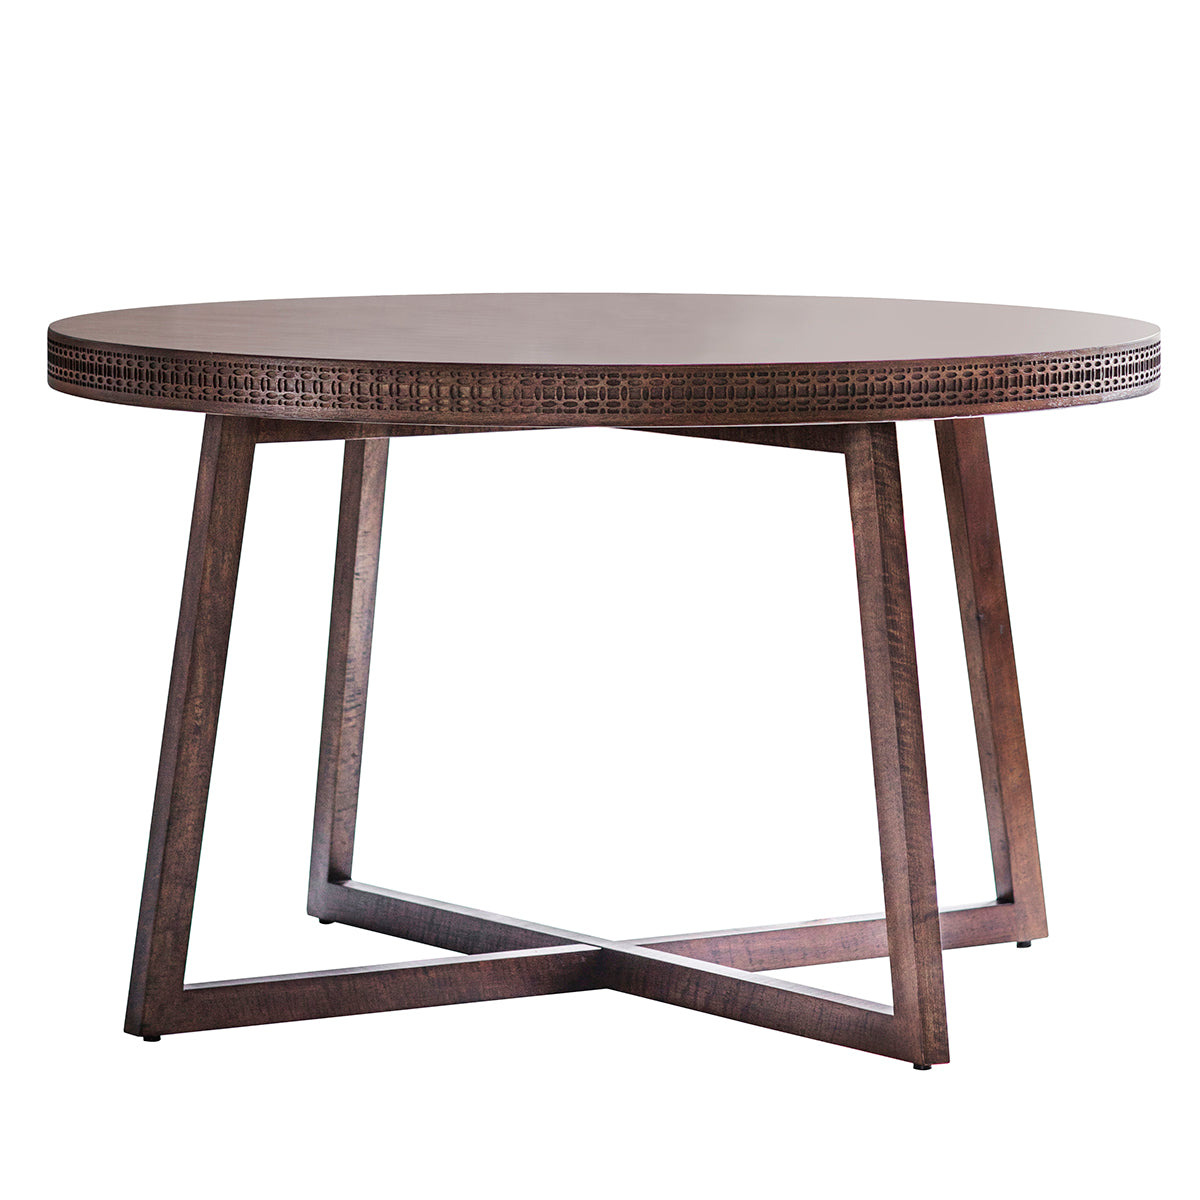 A home furniture Dartington Retreat Round Dining Table 1200x1200x750mm with a wooden base for interior decor from Kikiathome.co.uk.